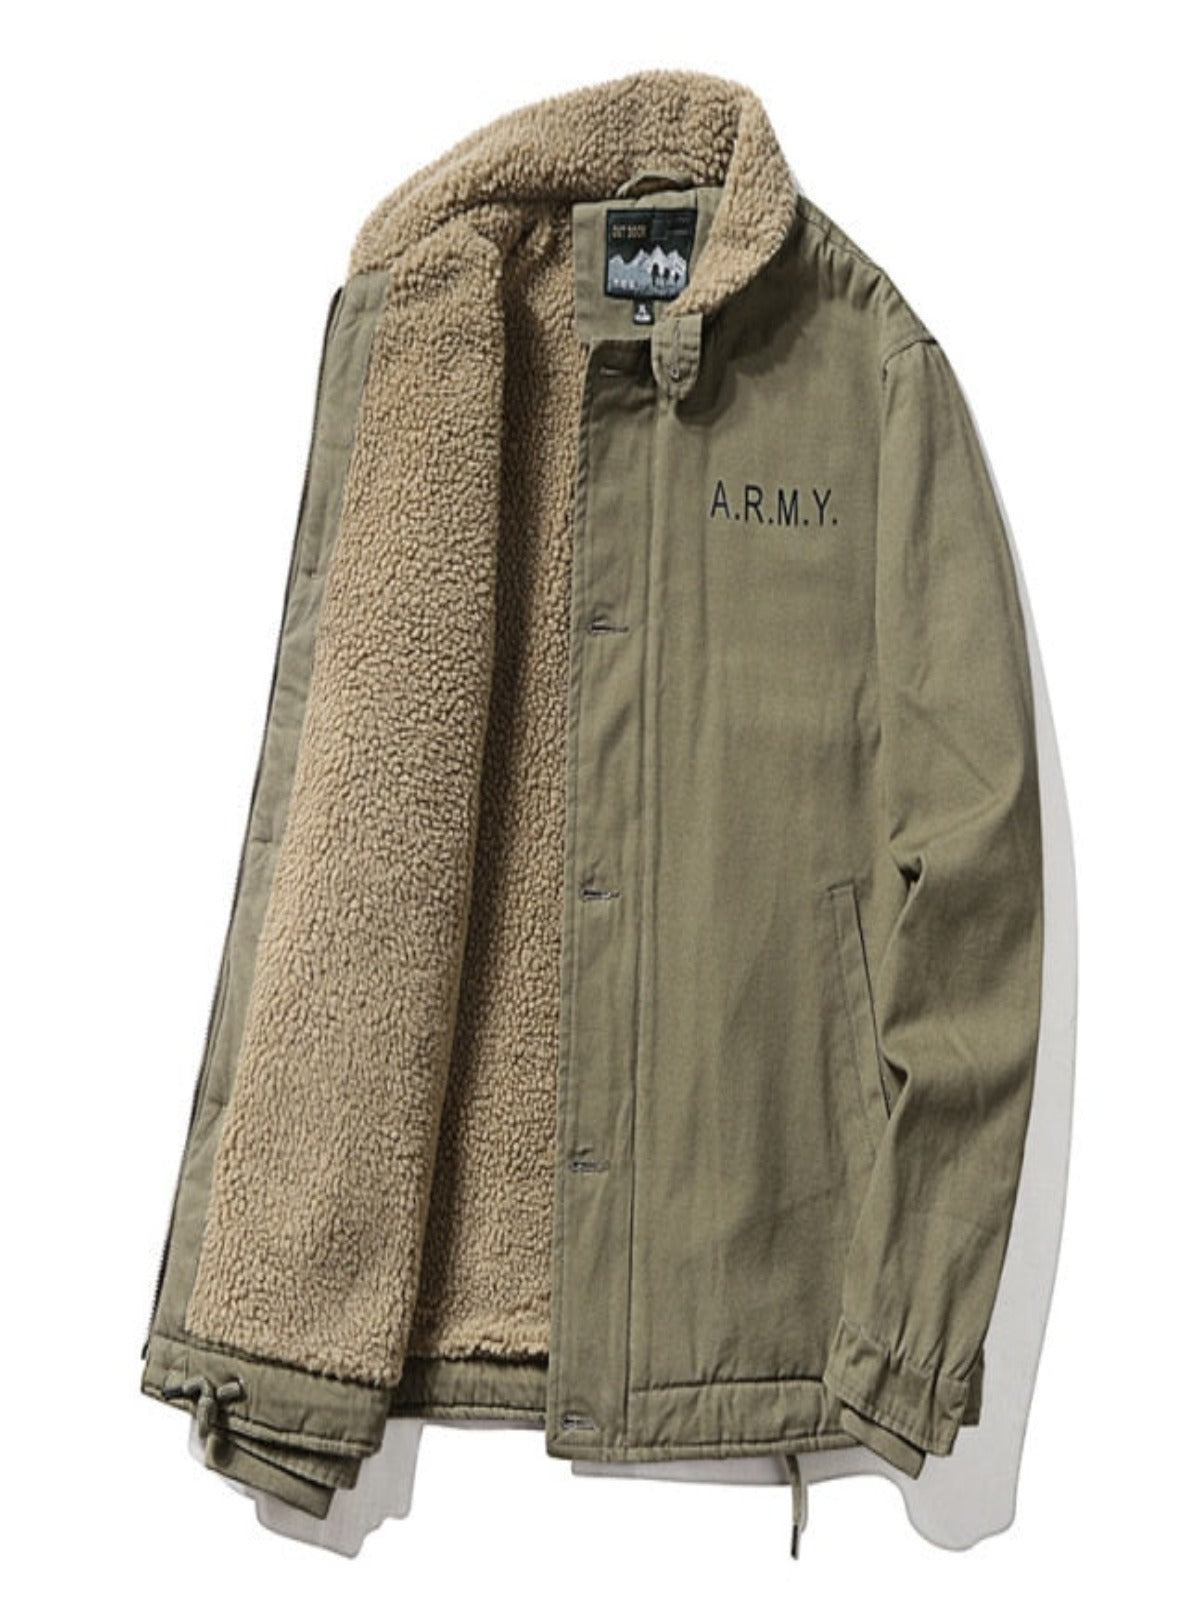 A.R.M.Y Cotton-Lined Bomber Jacket